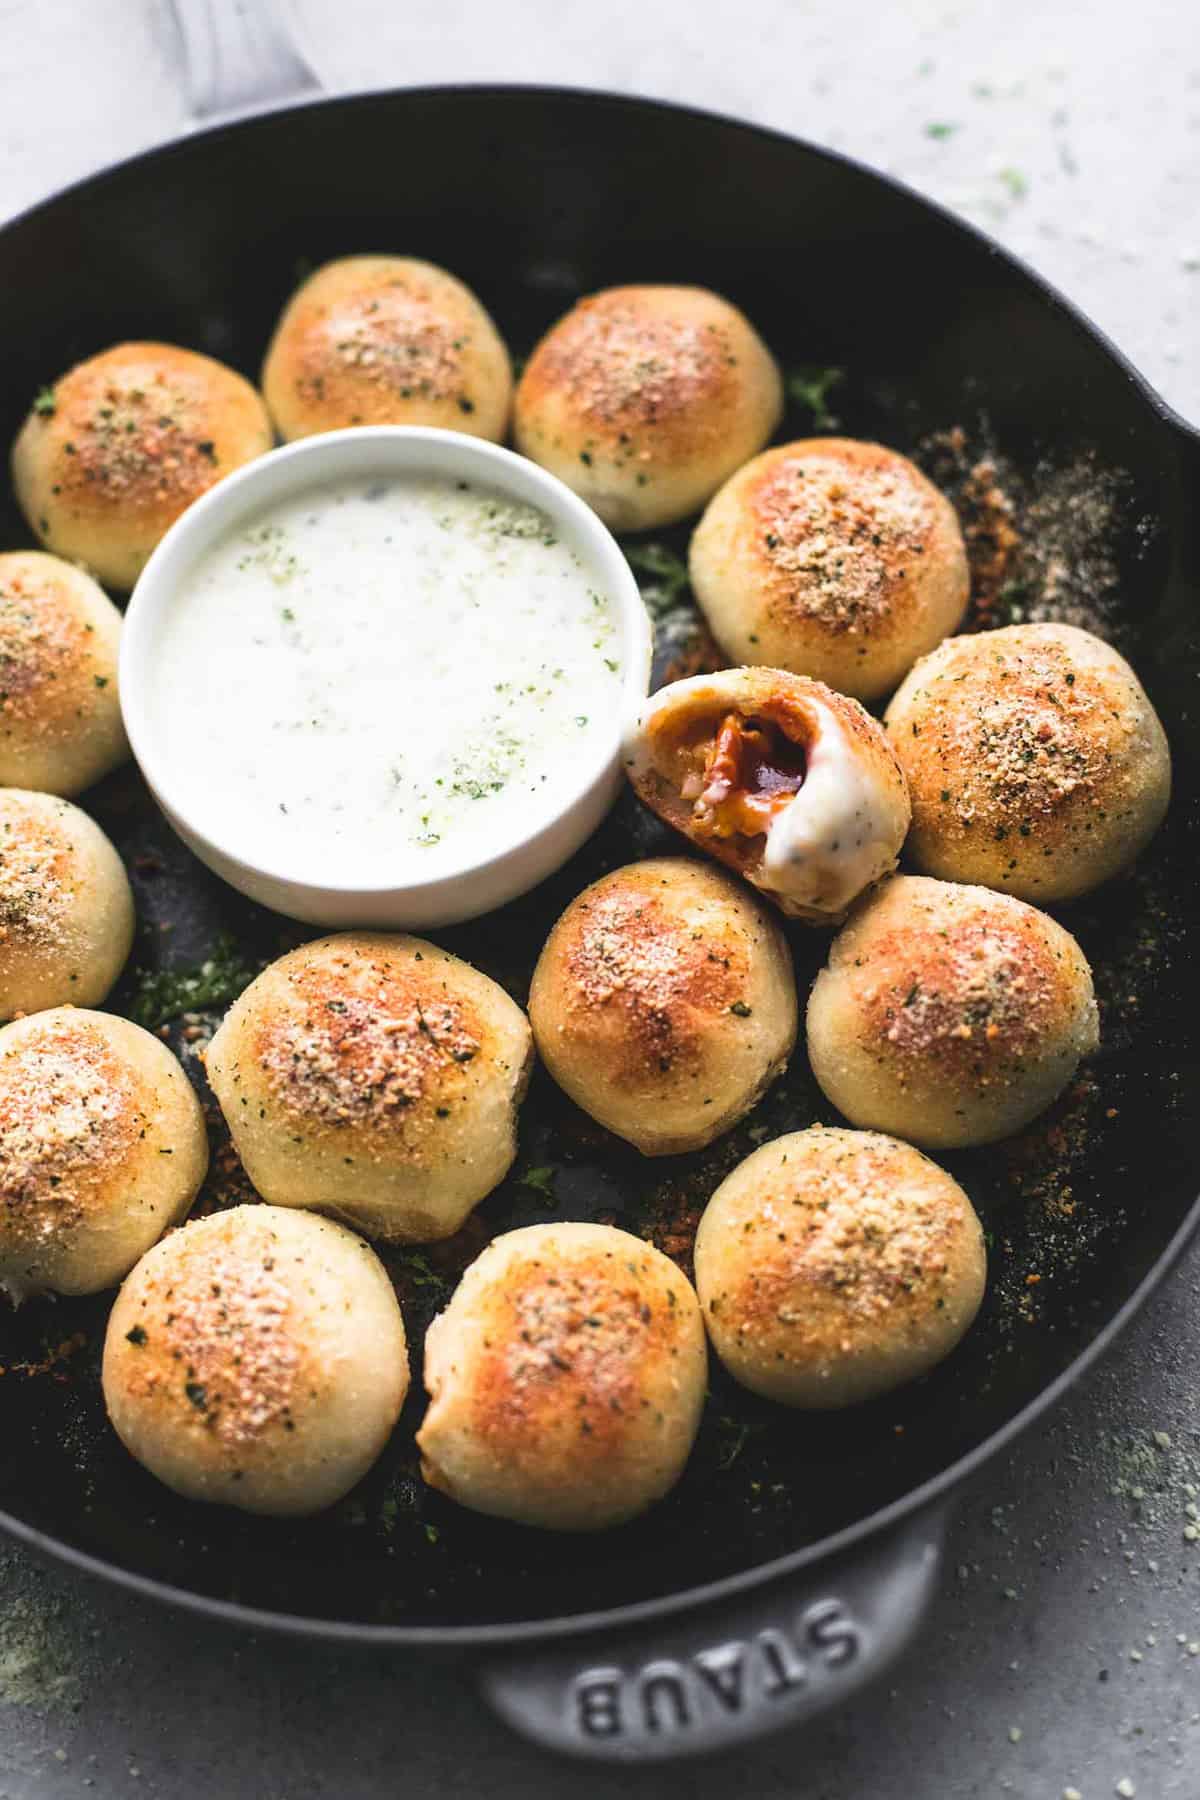 bbq chicken bites with one missing a bite around a bowl of dipping sauce all in a pan.